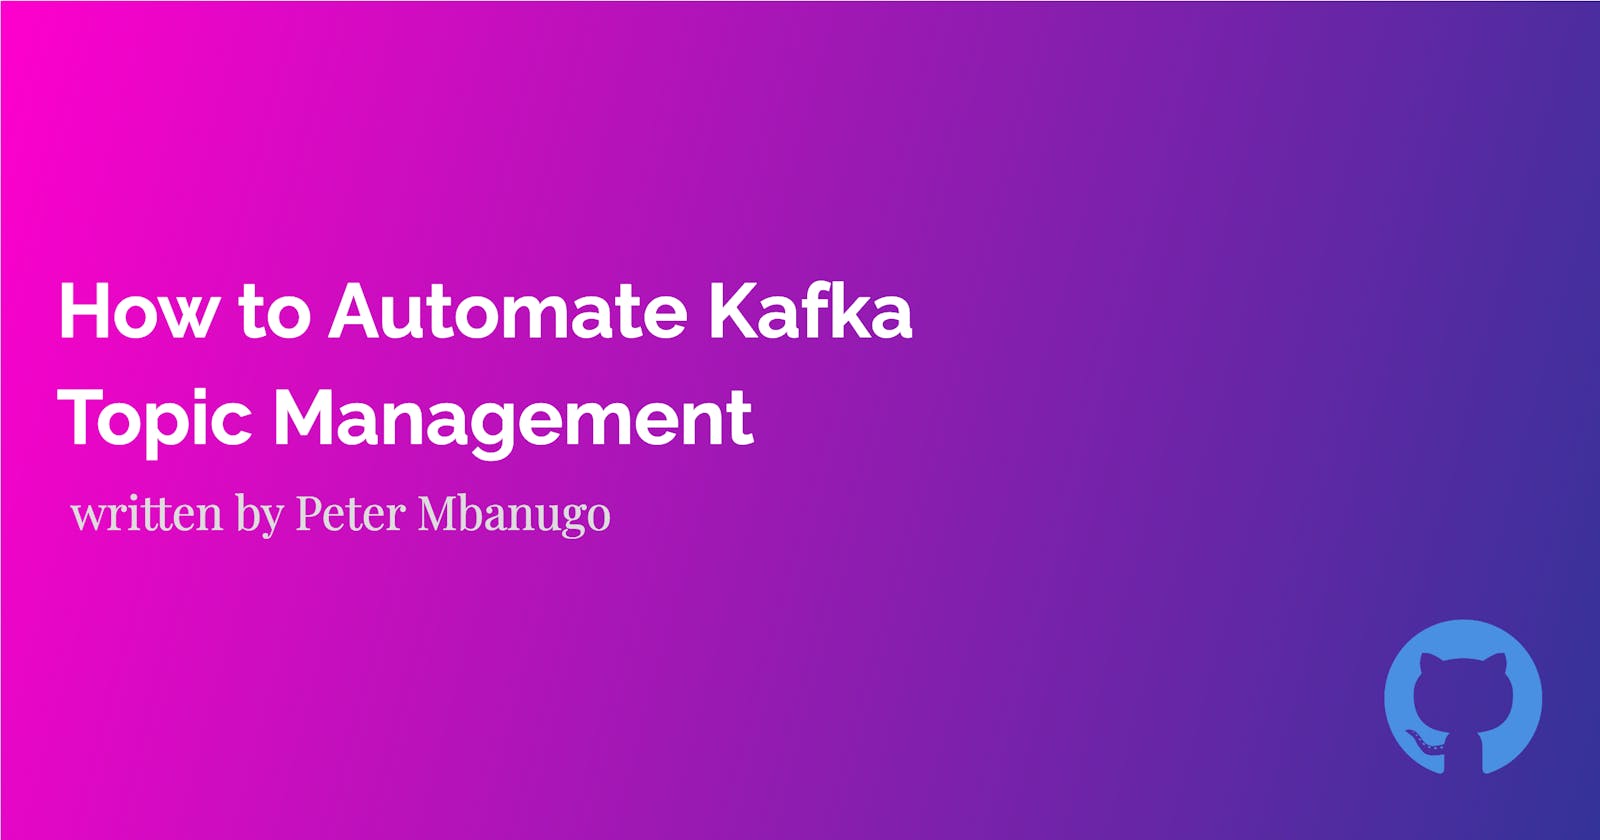 How to Automate Kafka Topic Management